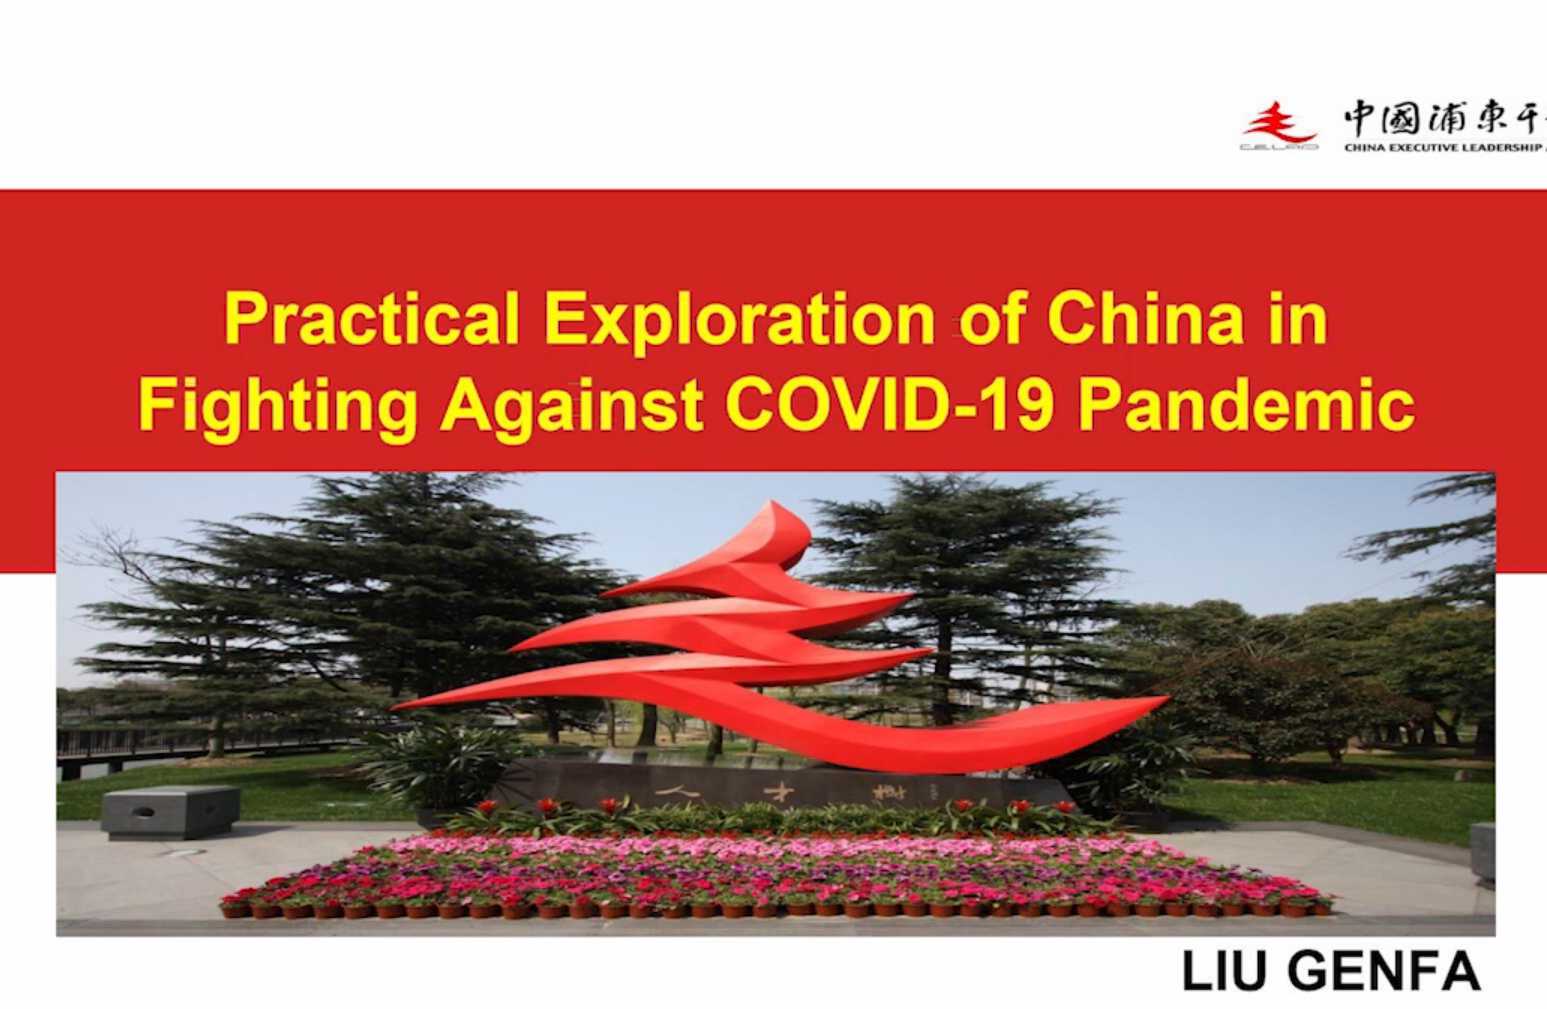 Practical exploration of China in fighting against COVID-19 pandemic